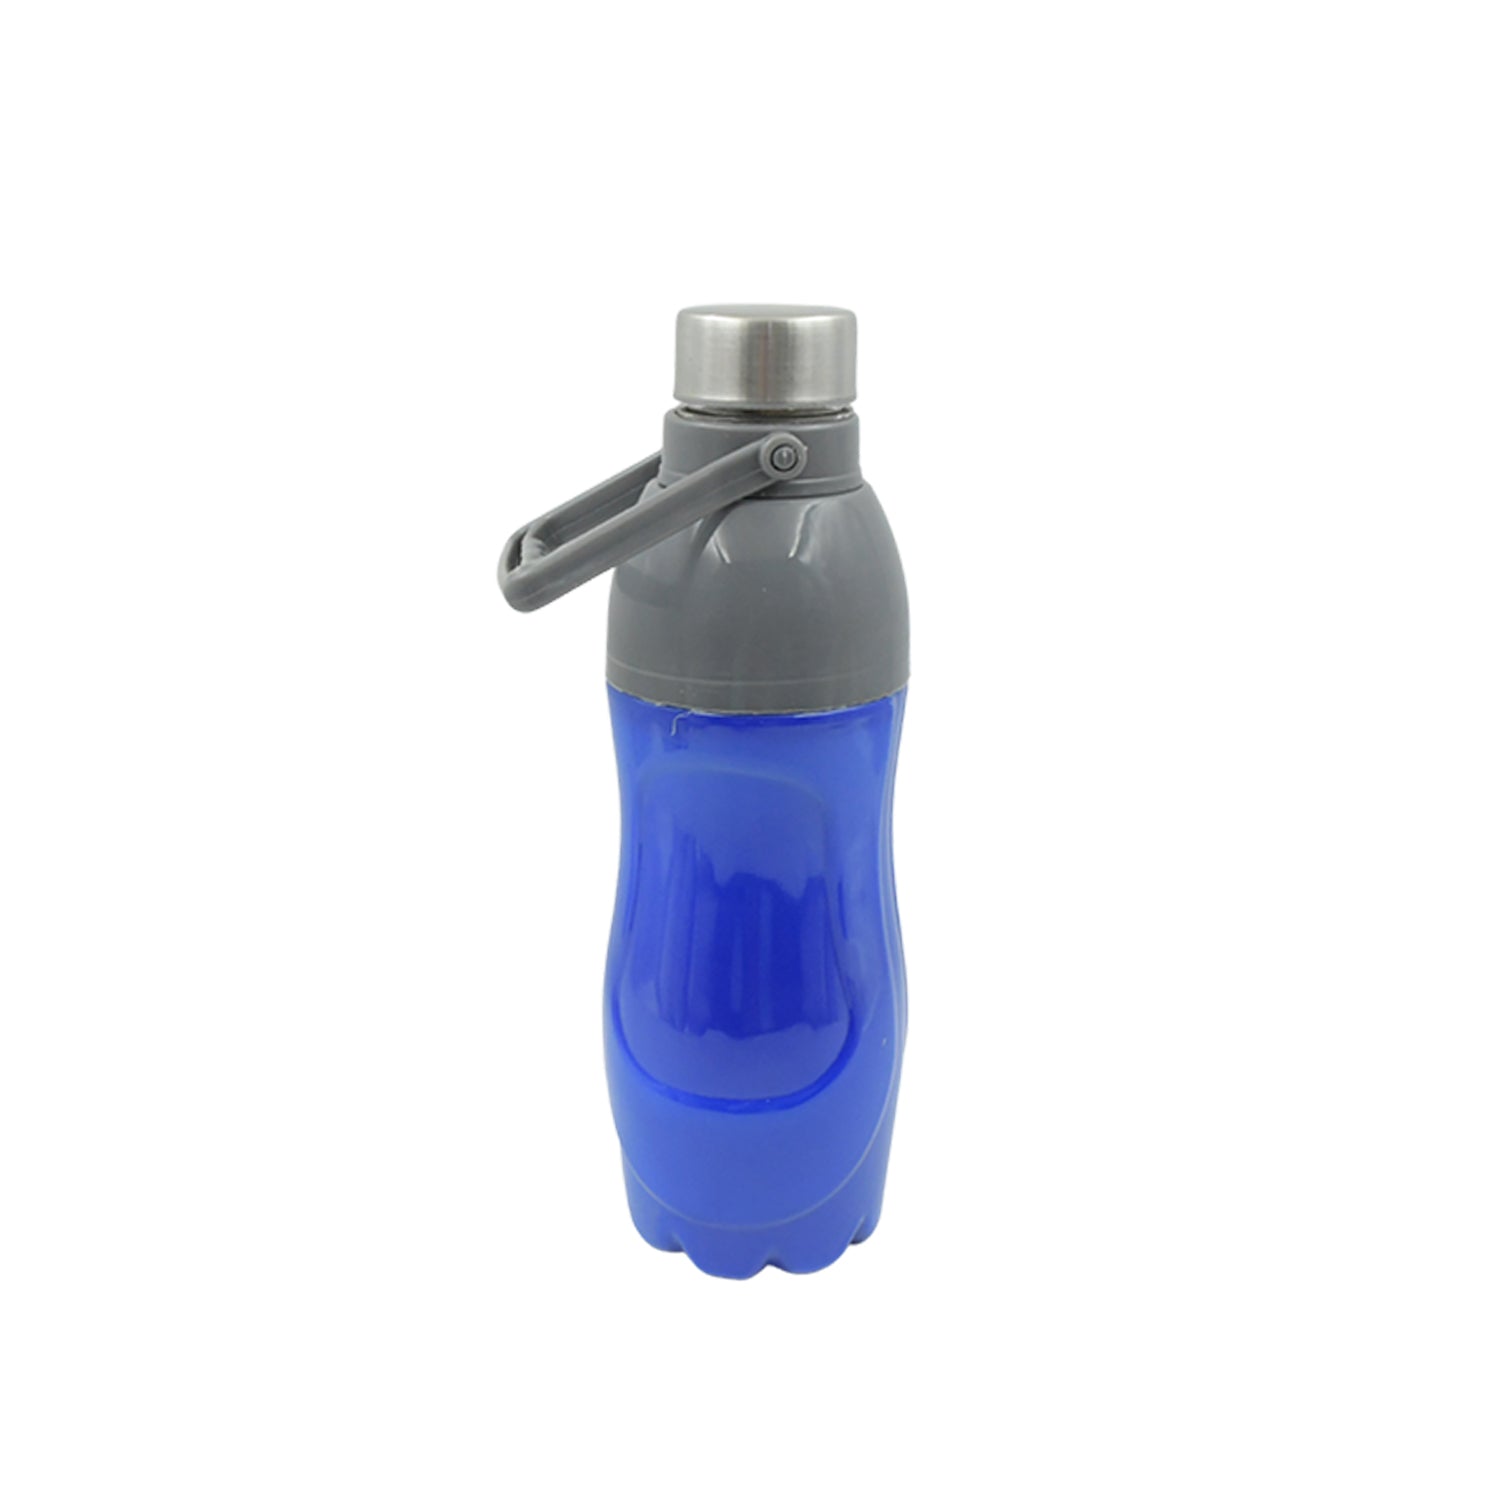 6277 Plastic Sports Insulated Water Bottle with Handle Easy to Carry High Quality Water Bottle, BPA-Free & Leak-Proof! for Kids' School, For Fridge, Office, Sports, School, Gym, Yoga (1 Pc Mix Color)